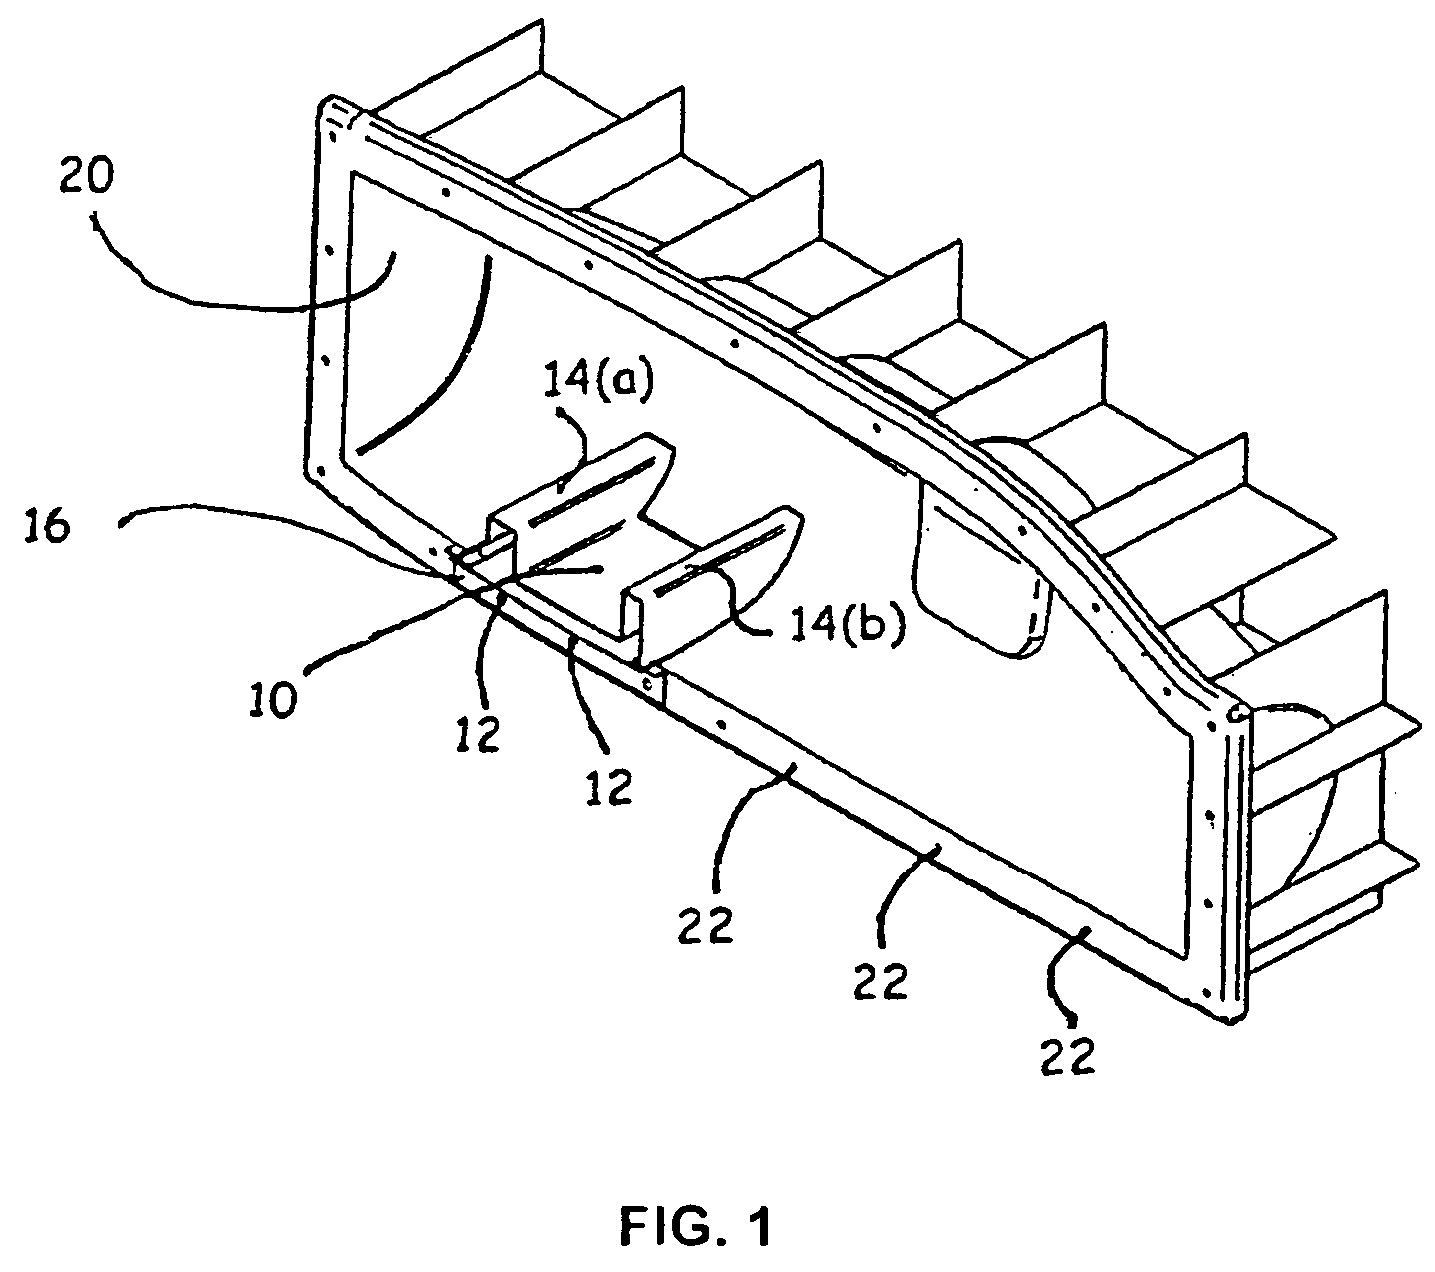 Methods for manufacturing composite aircraft, parts and a family of composite aircraft